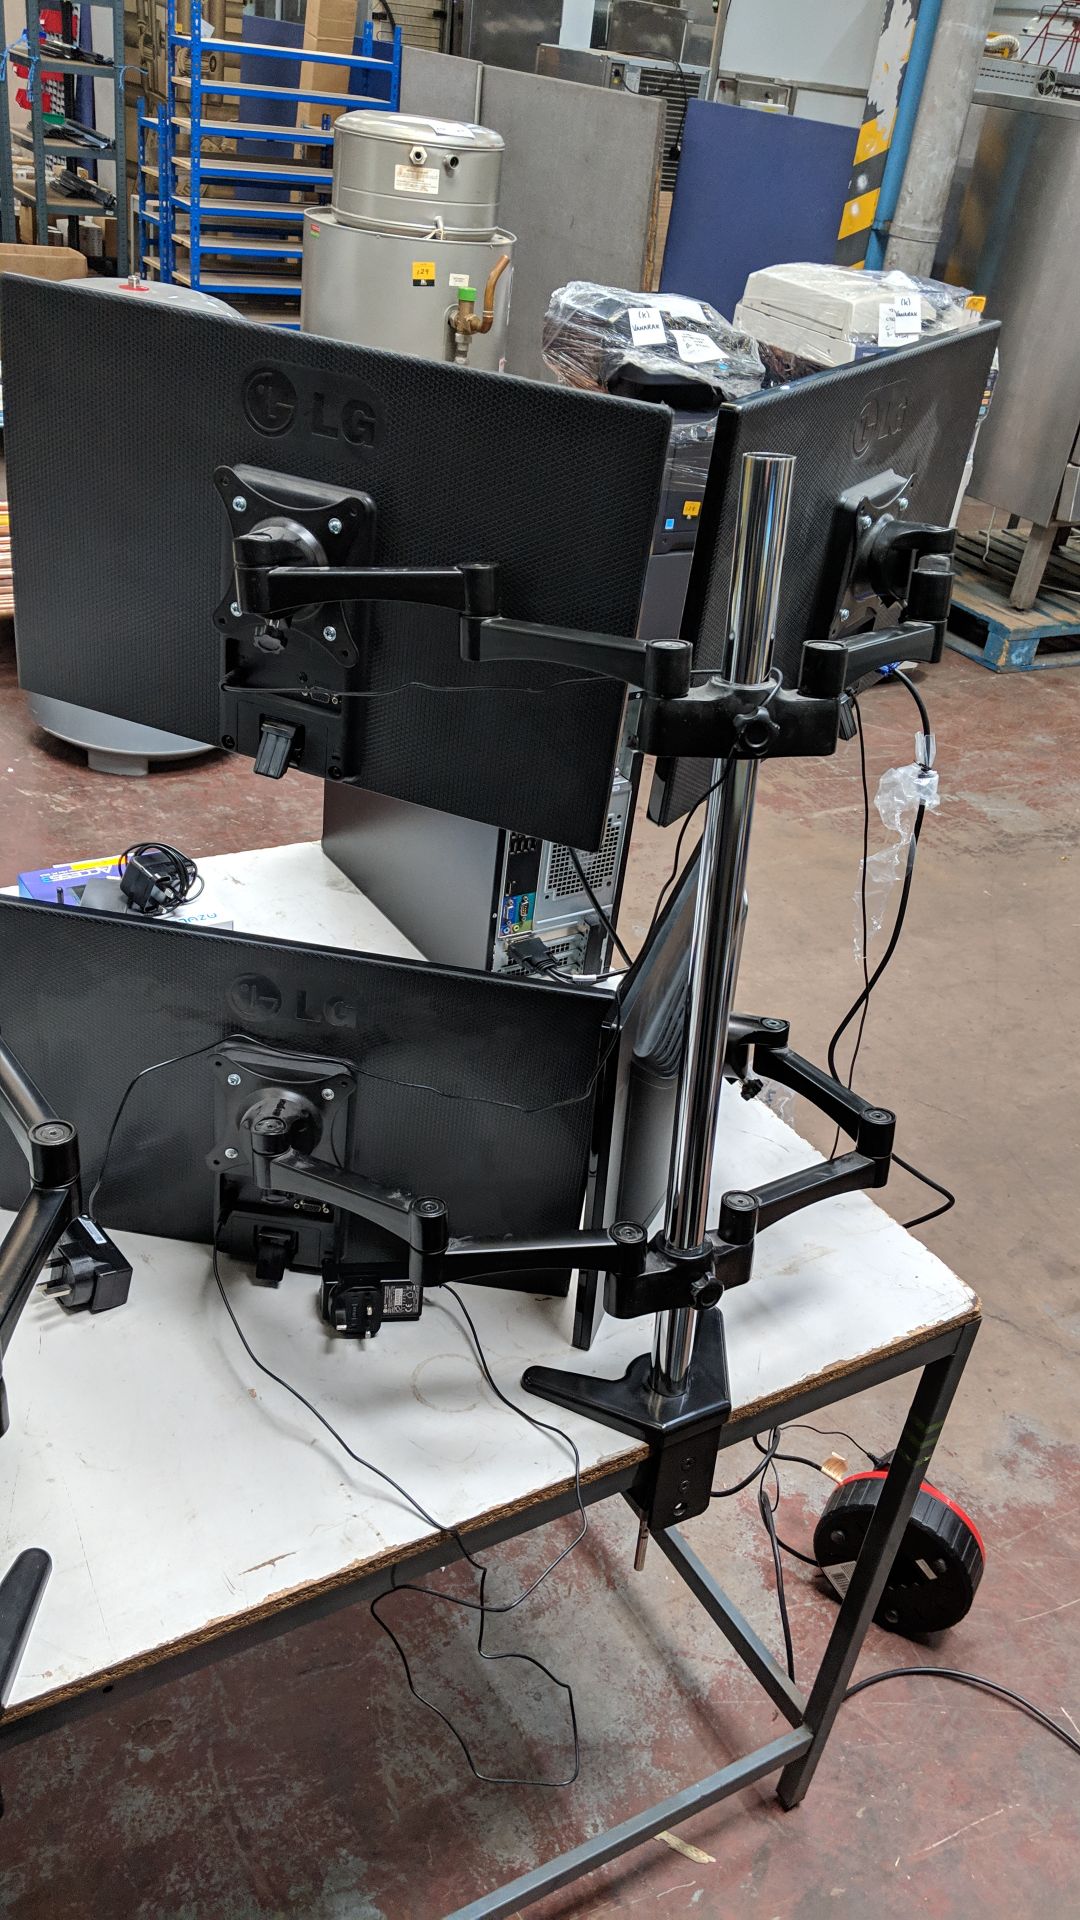 Quad monitor system comprising desk clamp/stand & 4 off assorted 22" widescreen monitors - Image 10 of 10